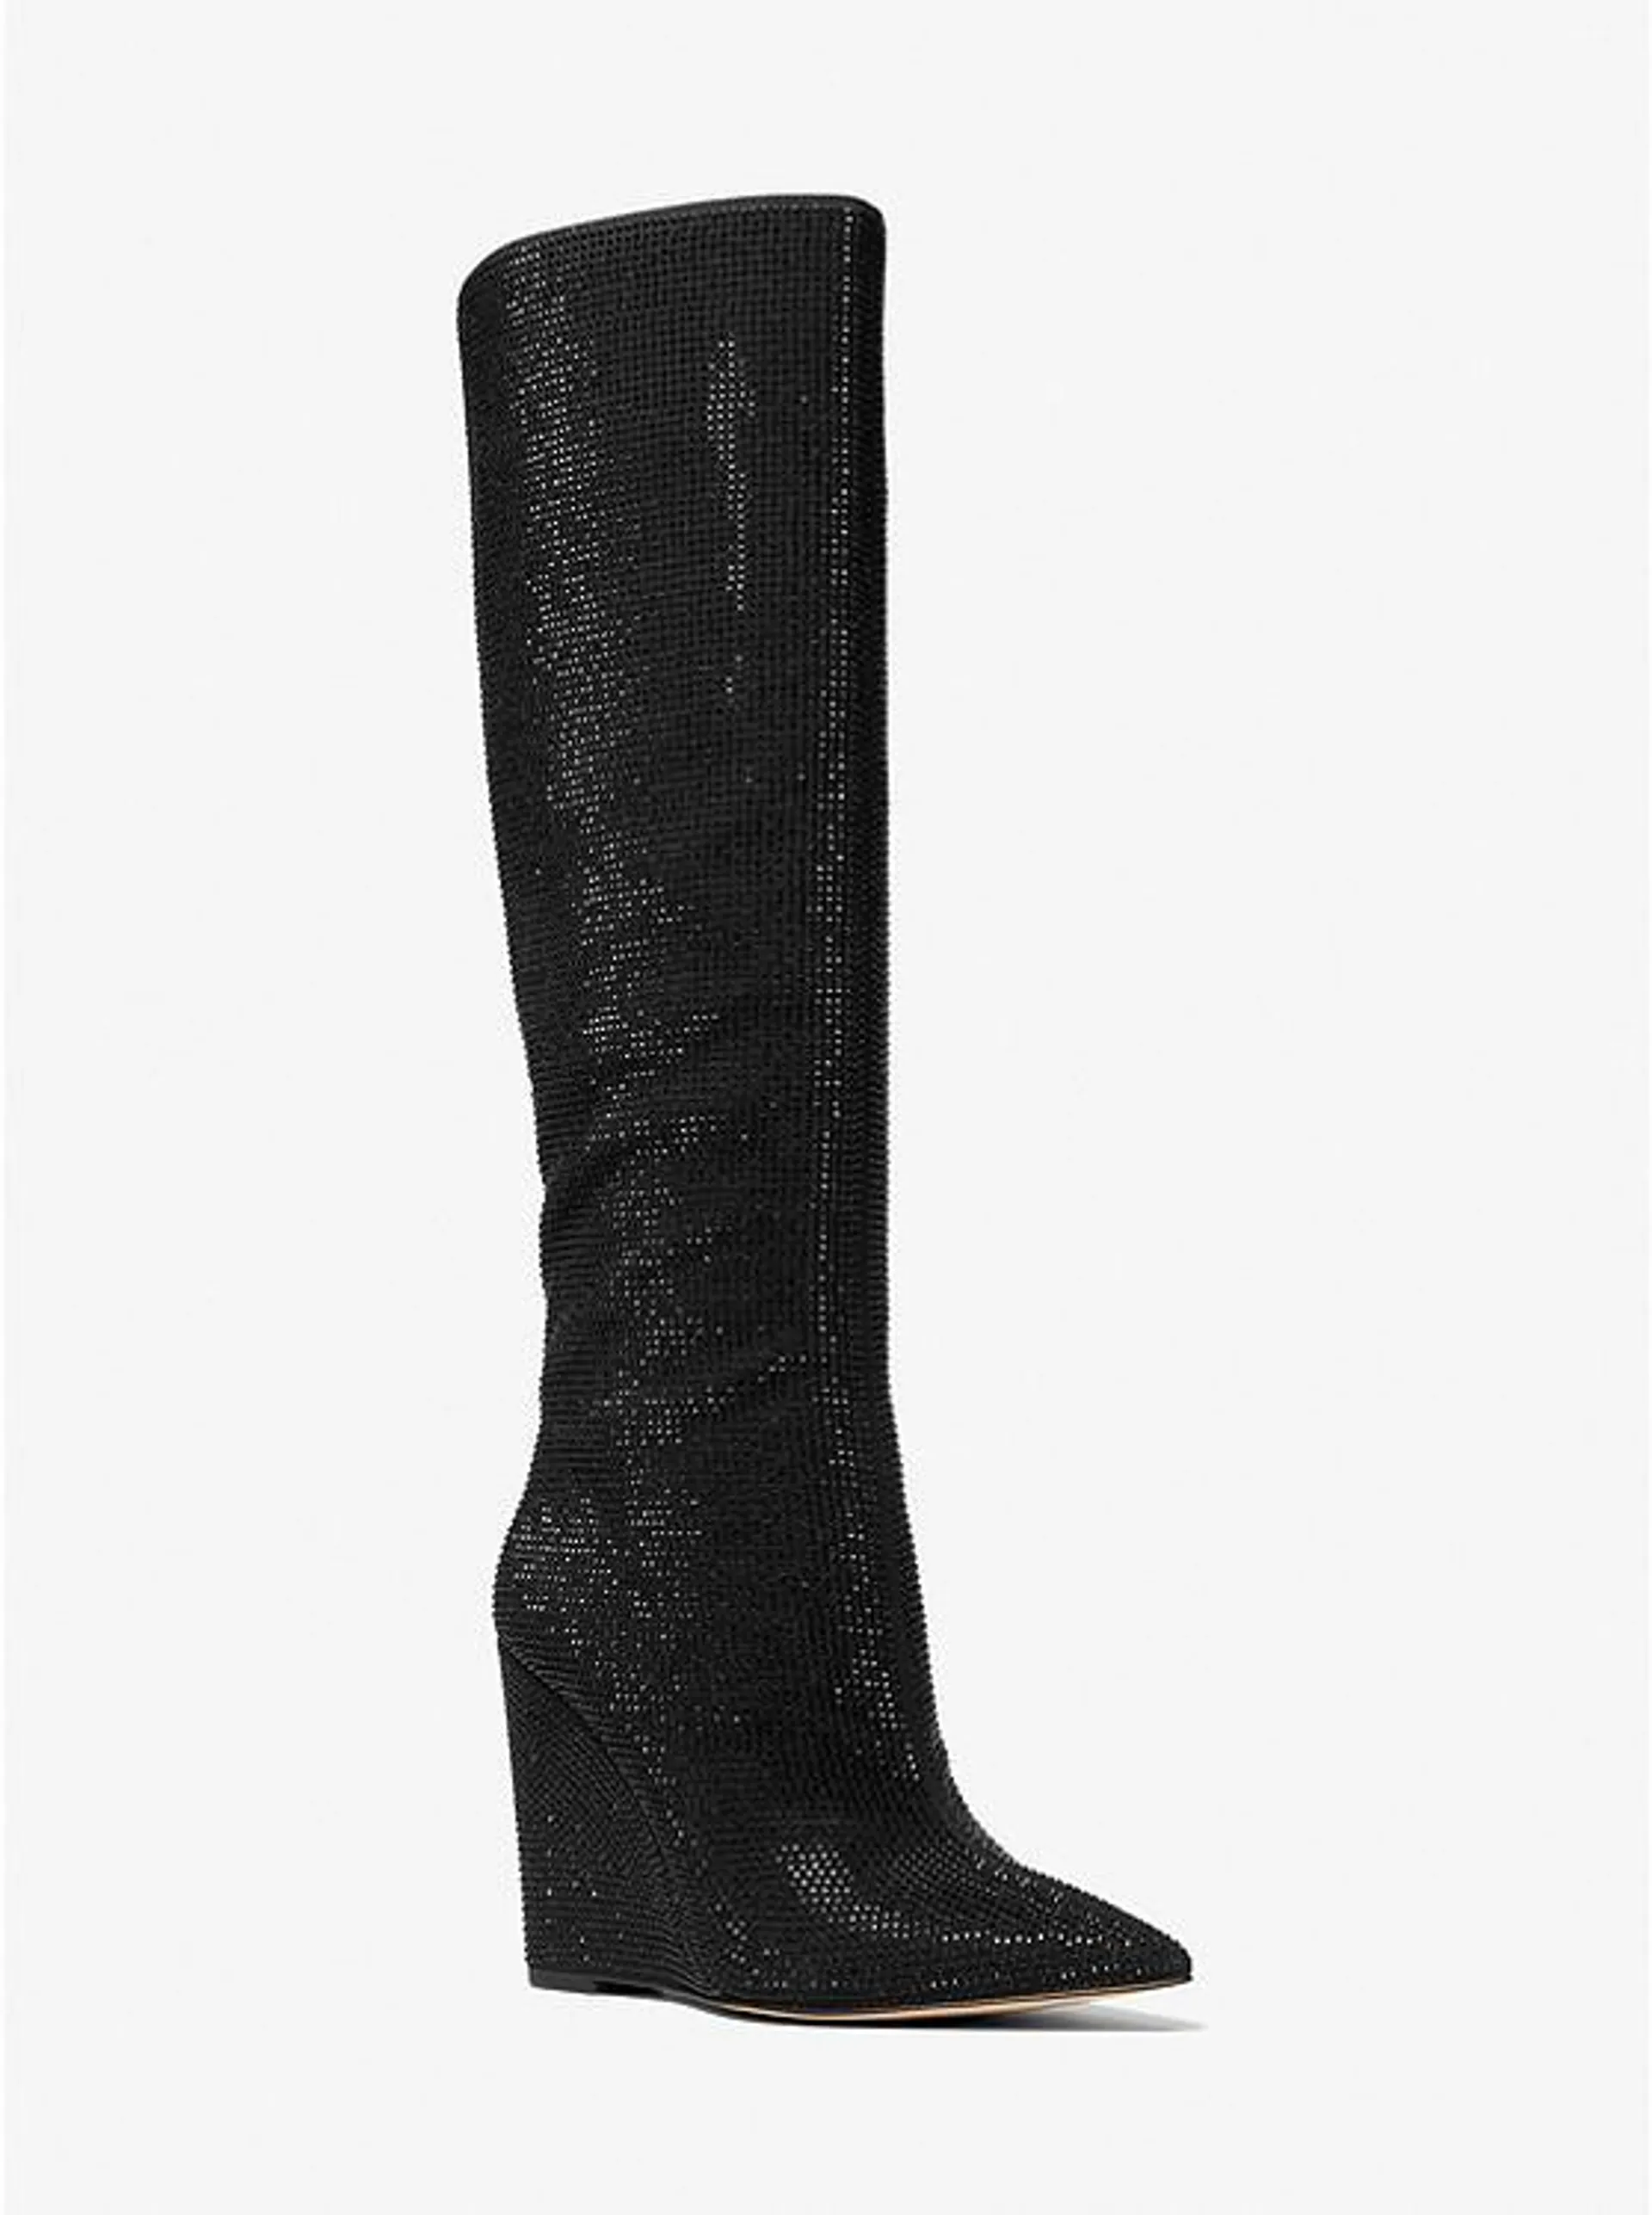 Alina Flex Snake Embossed Leather Ankle Boot